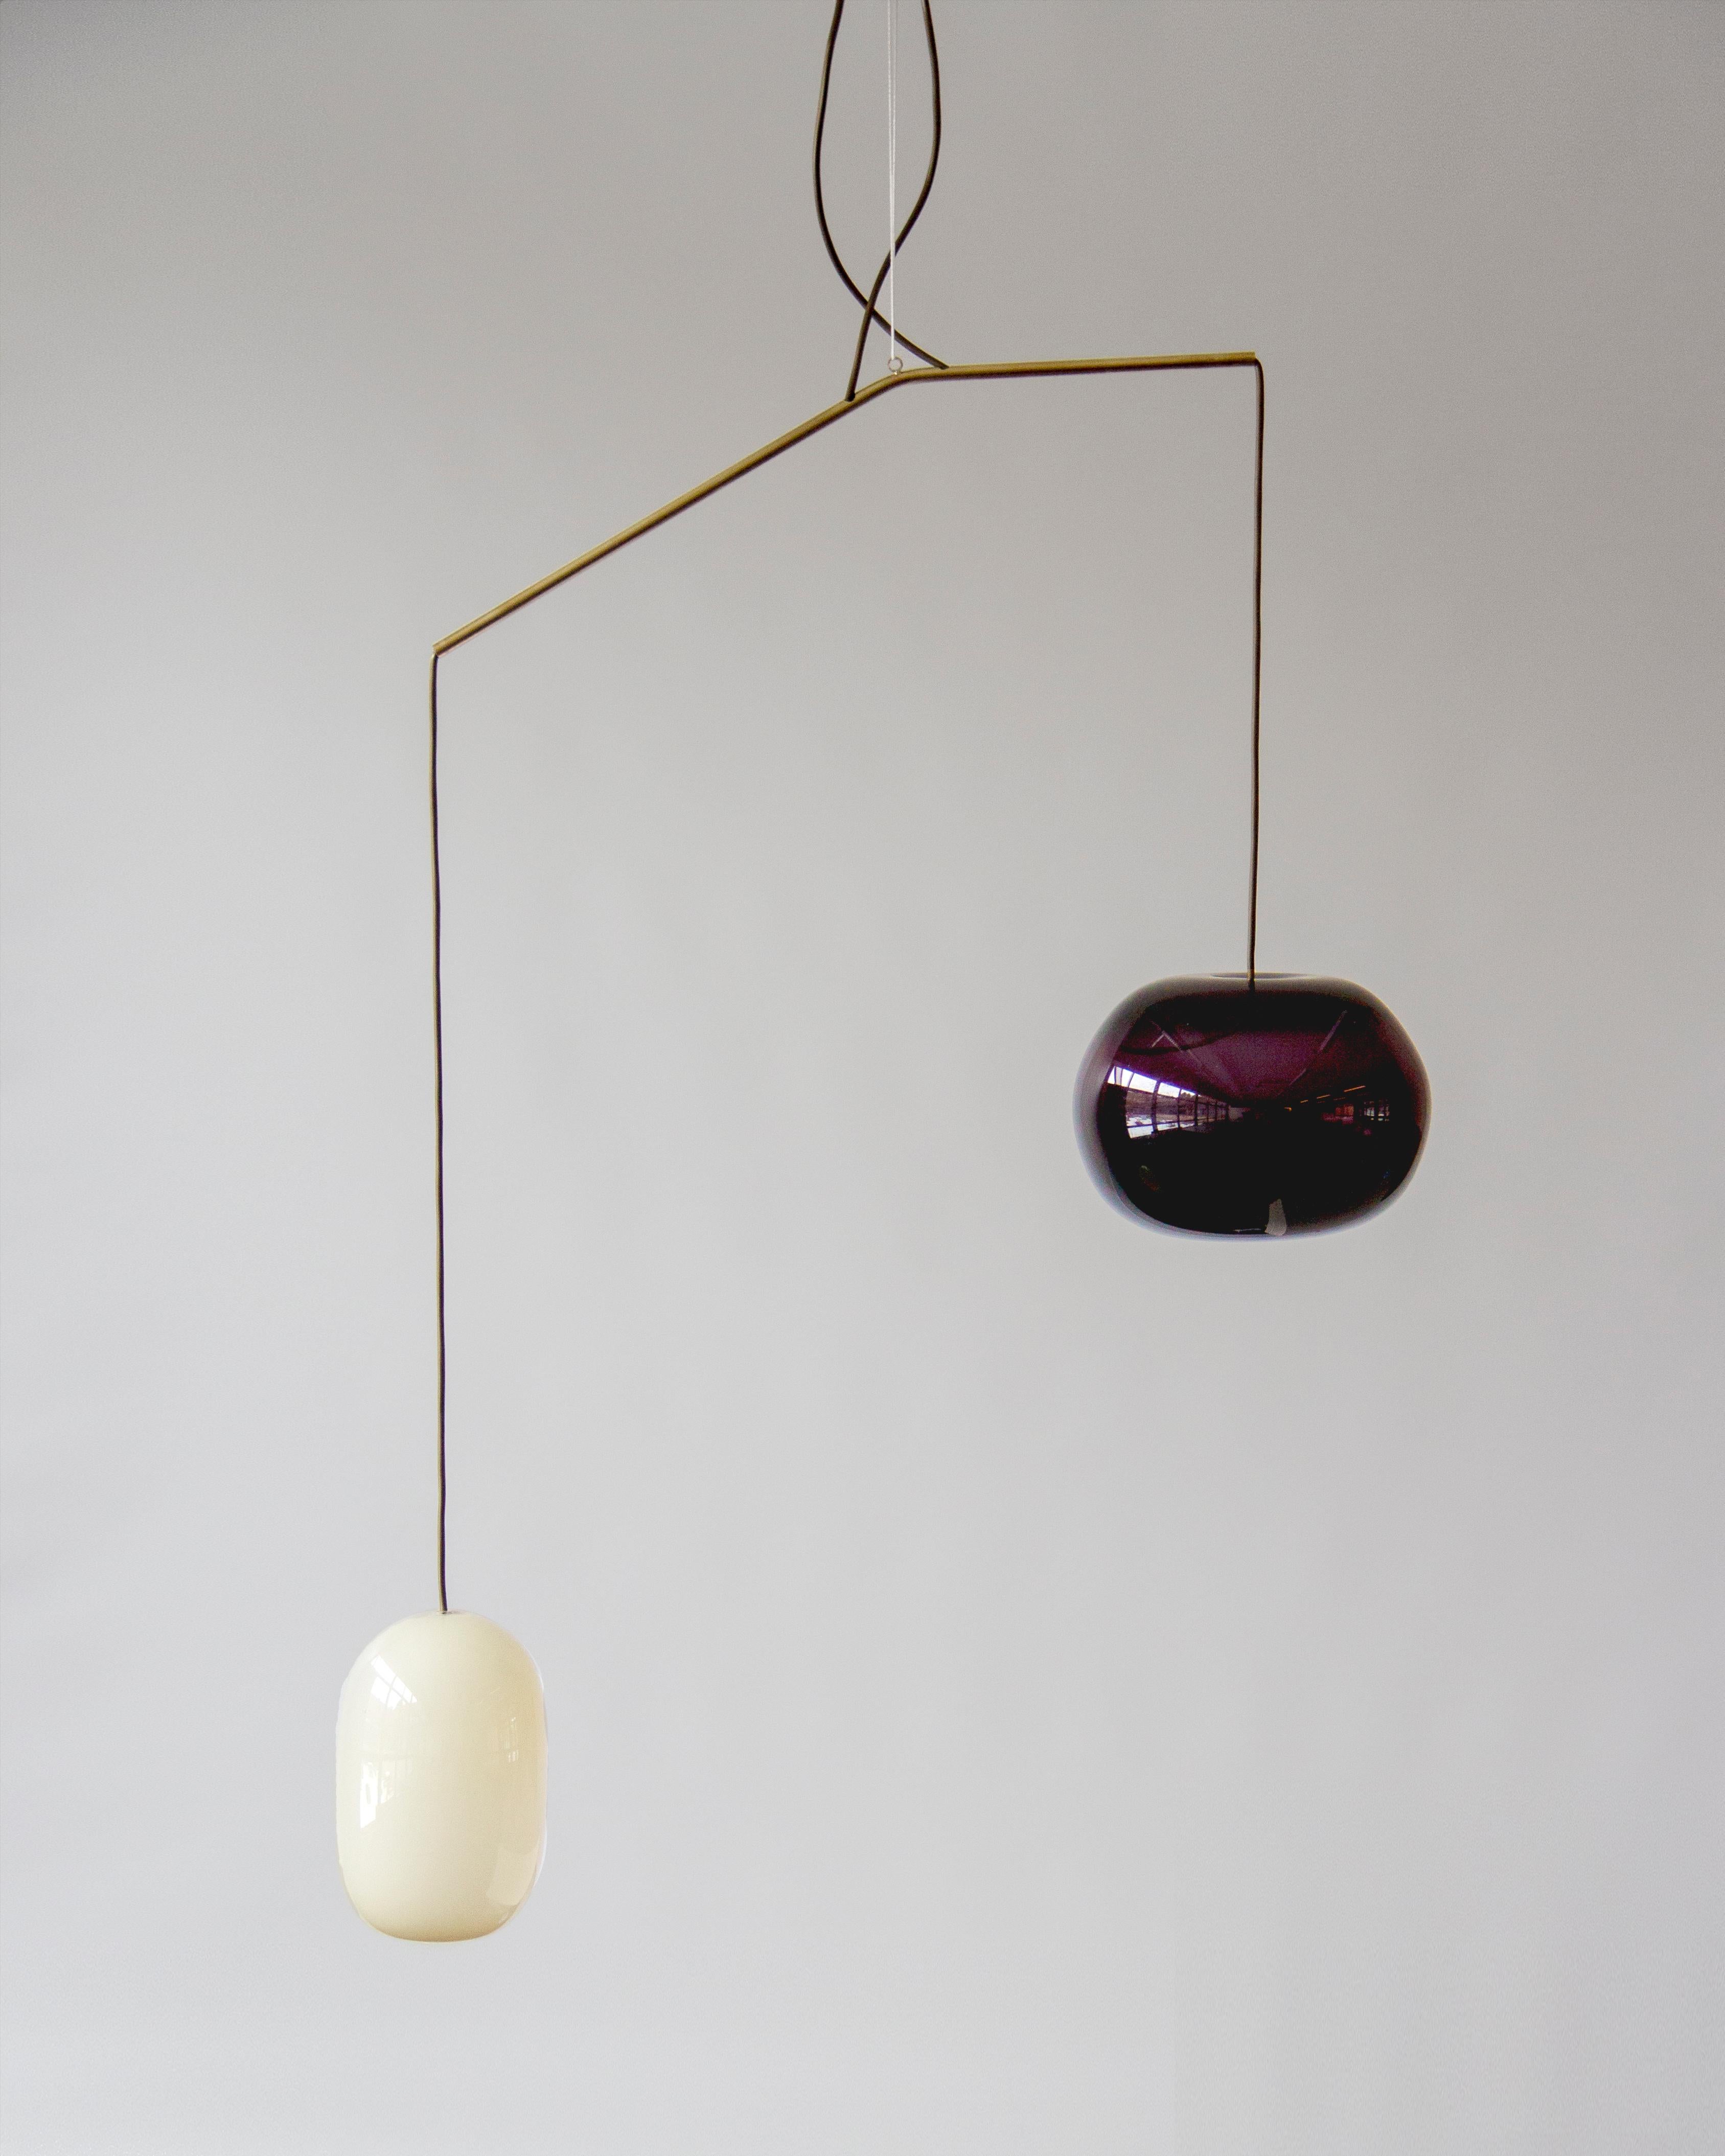 Sculptural light No. 67 by Milla Vaahtera
Dimensions: W 70 x D 28 x H 60 cm
Materials: Glass, brass
Dark glass dome is deep dark violet.

In 2020 Milla Vaahtera started a series of unique sculptural lights made out of brass and hand blown